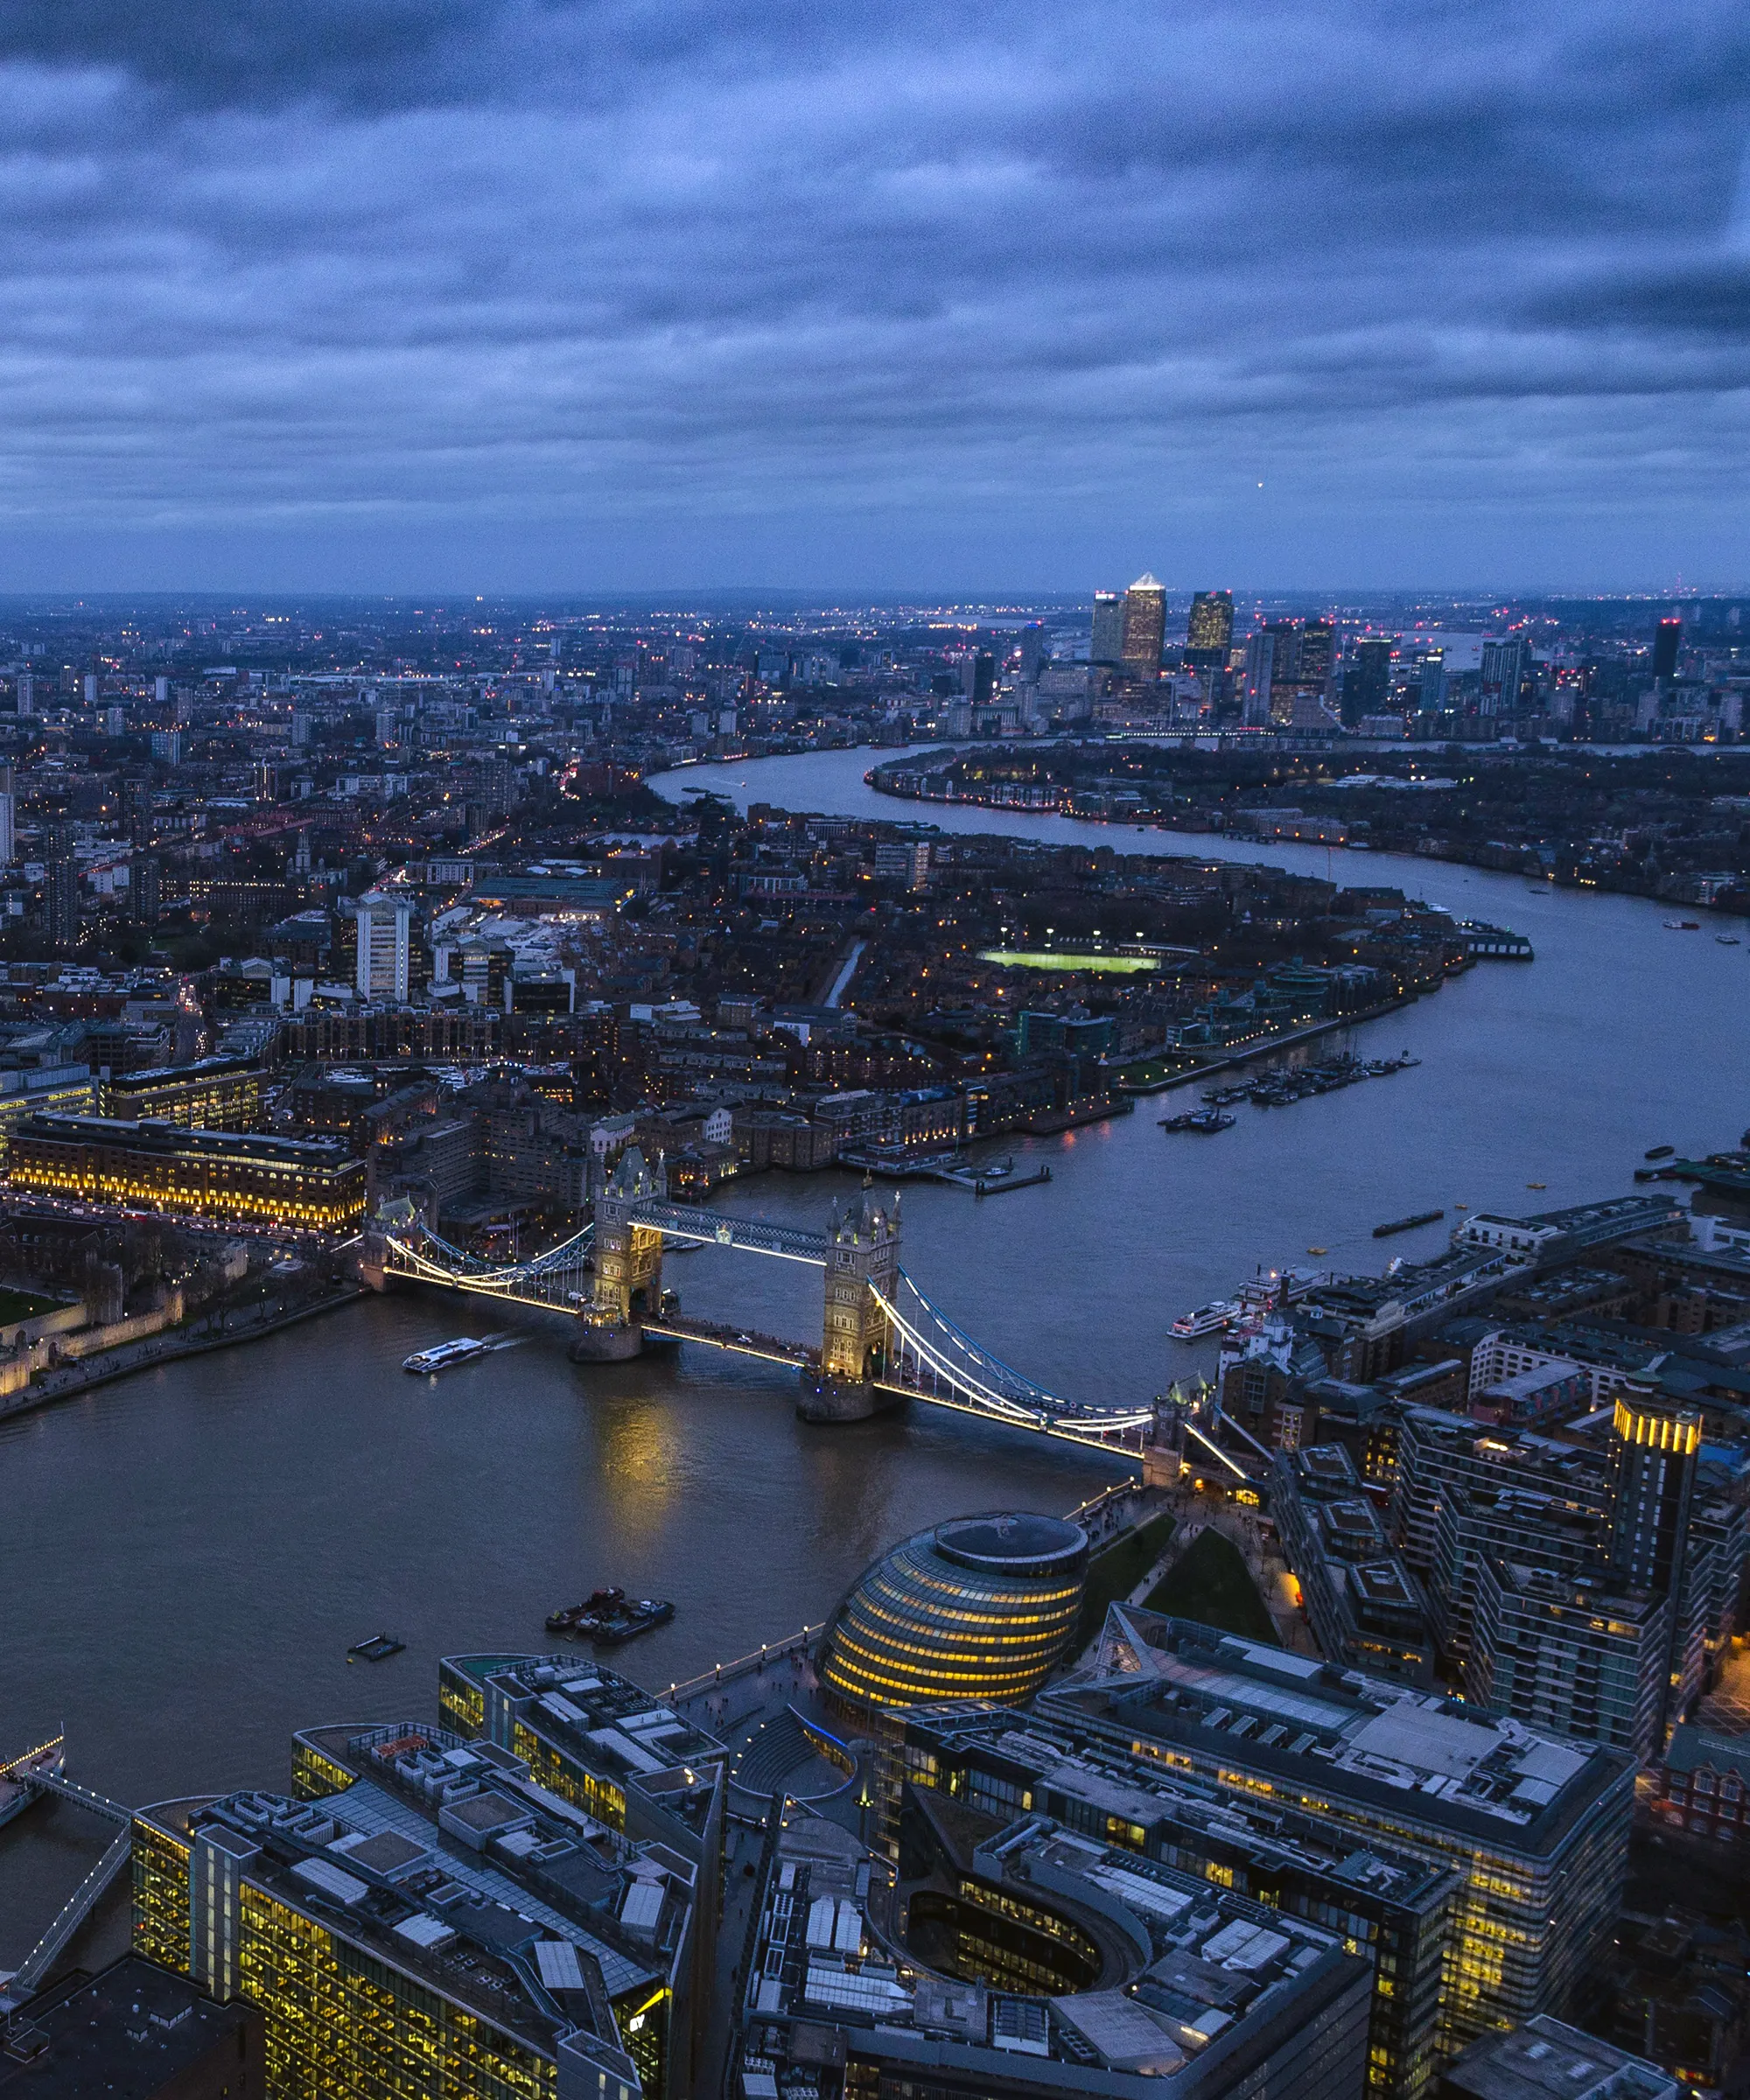 London from the sky at dusk